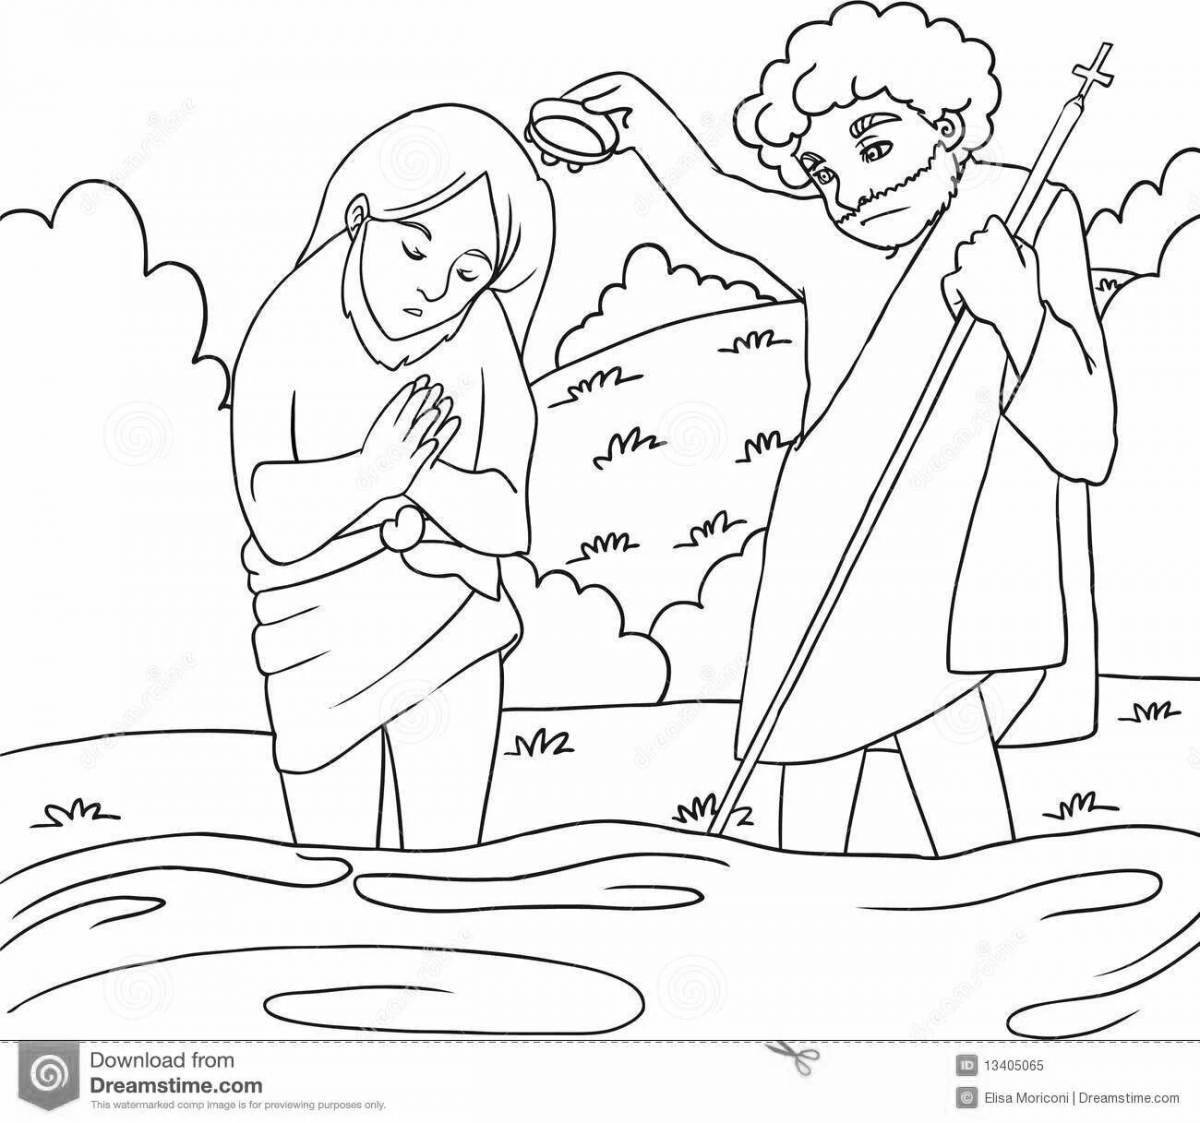 Animated epiphany coloring book